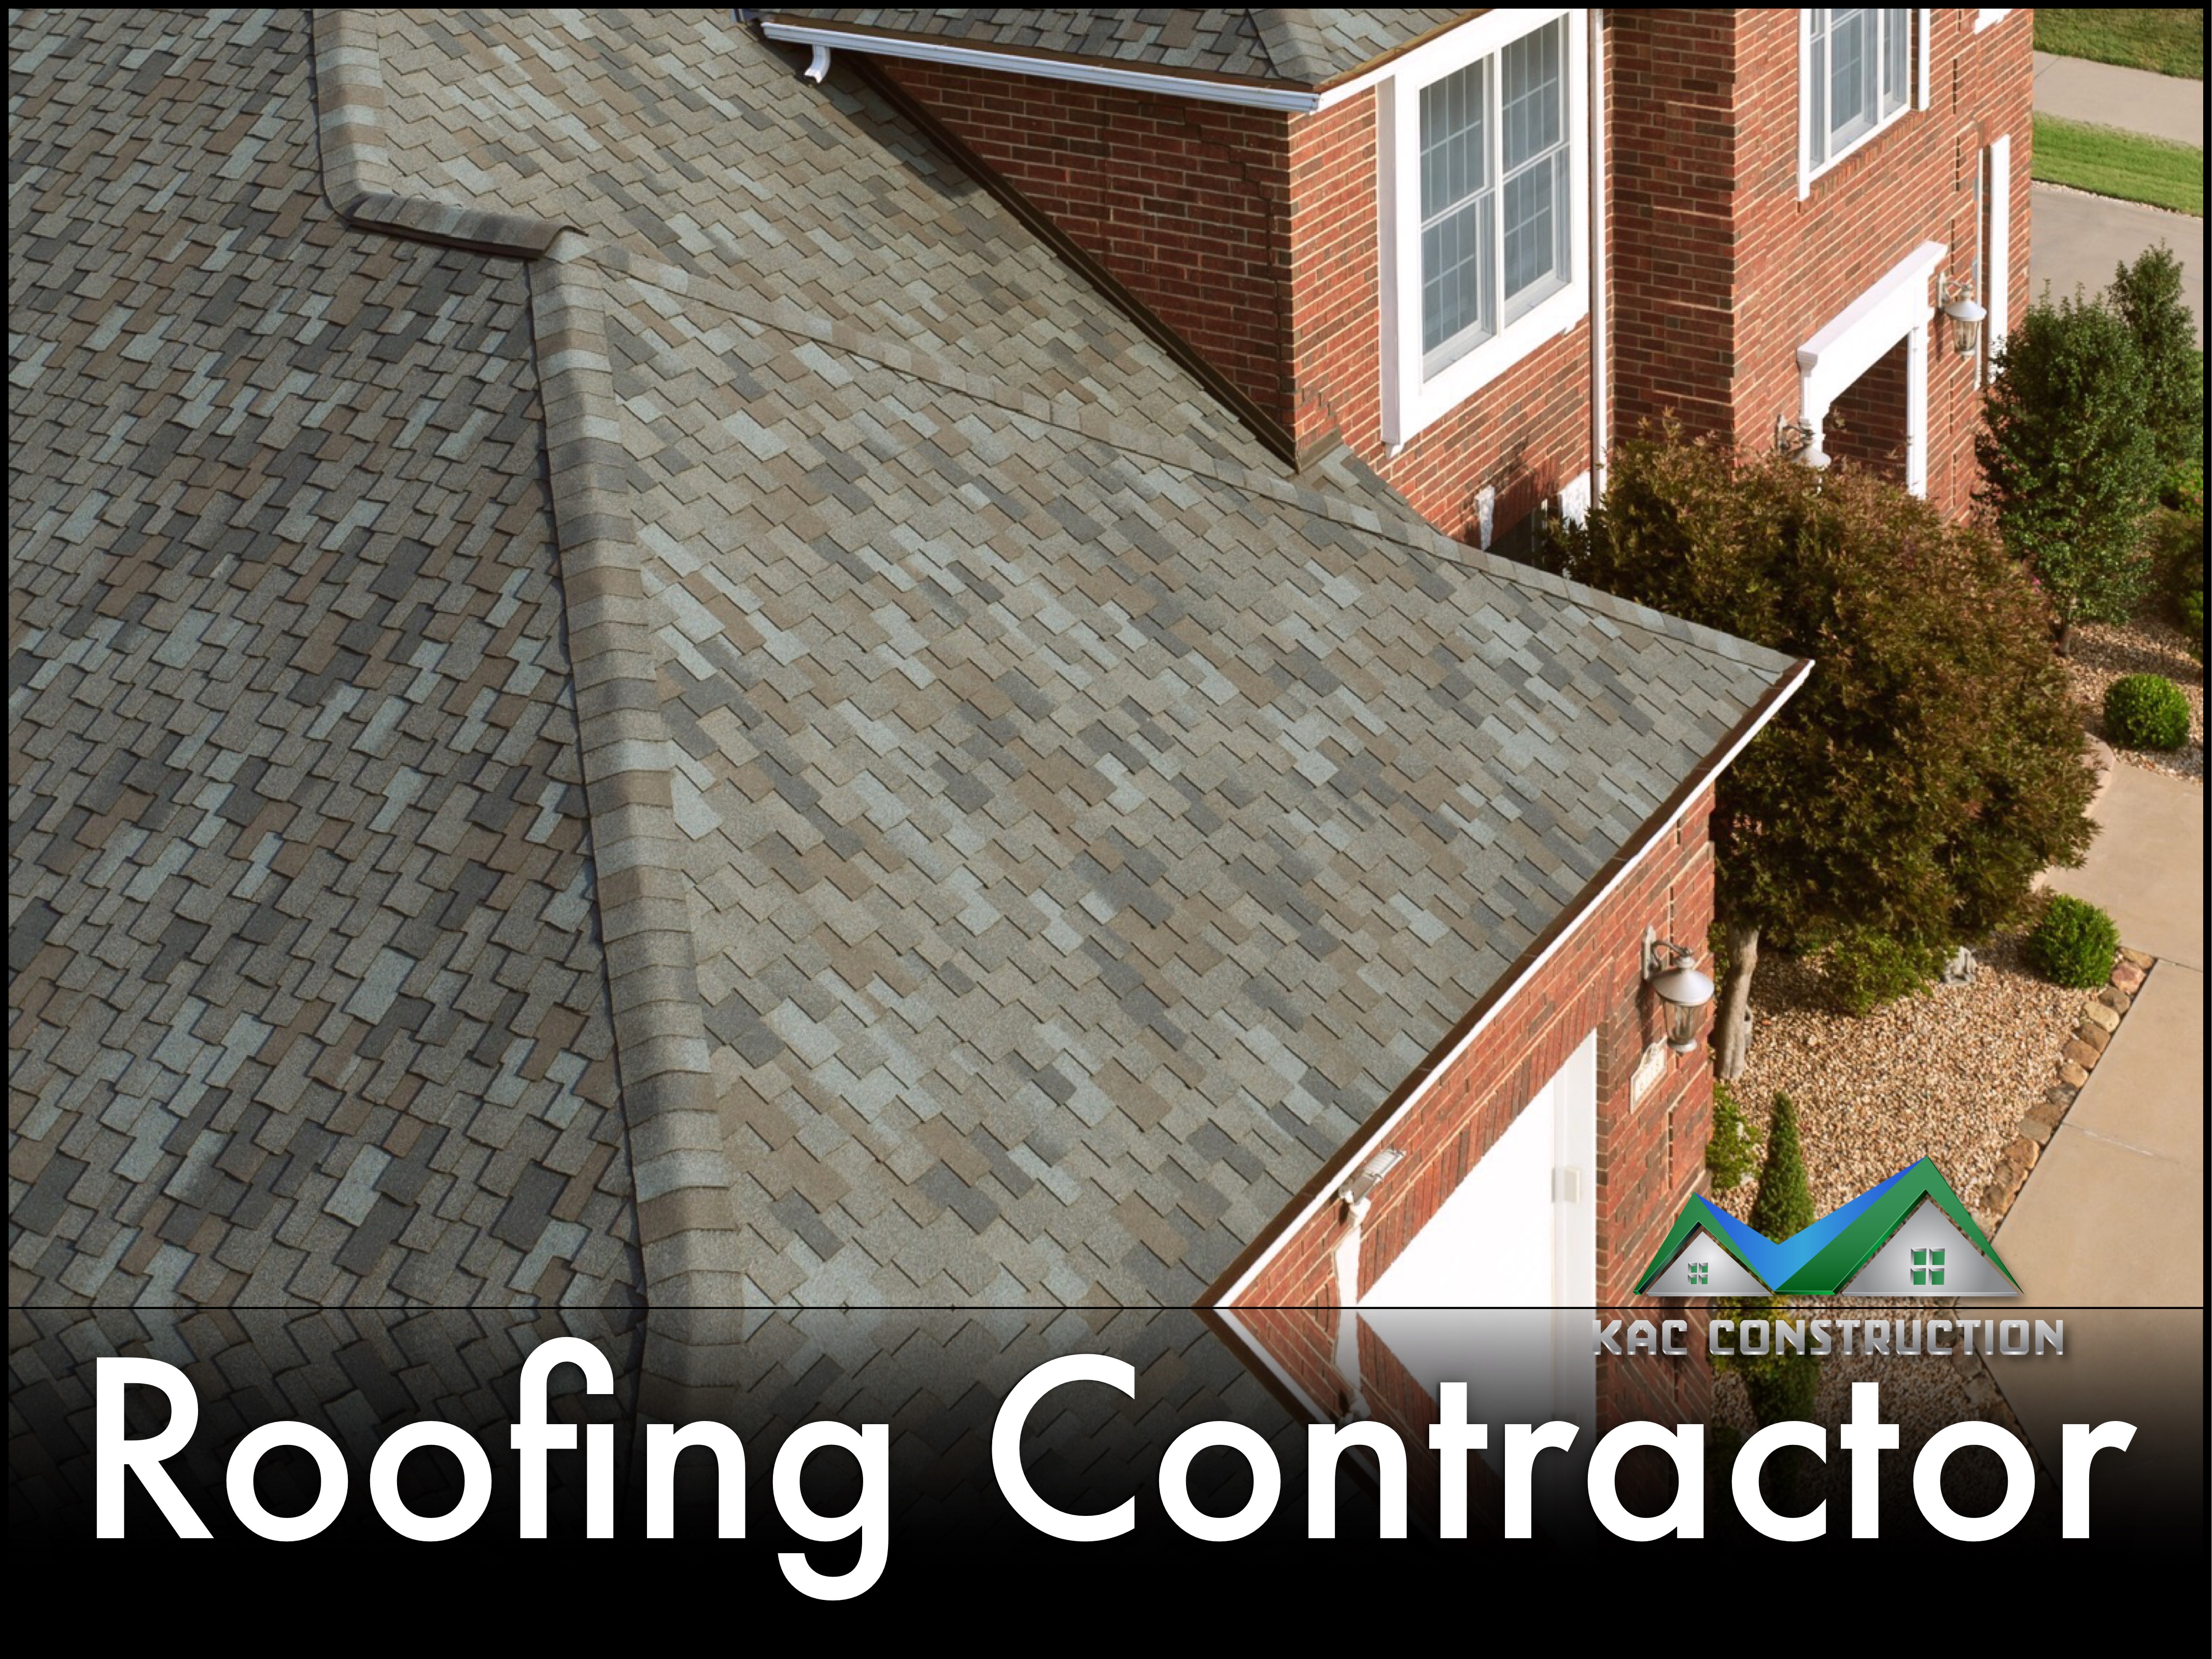 RESIDENTIAL ROOF CONTRACTOR, RESIDENTIAL ROOF CONTRACTOR RI, ROOF CONTRACTOR IN RI, ROOF CONTRACTOR RI, ROOF IN RI,